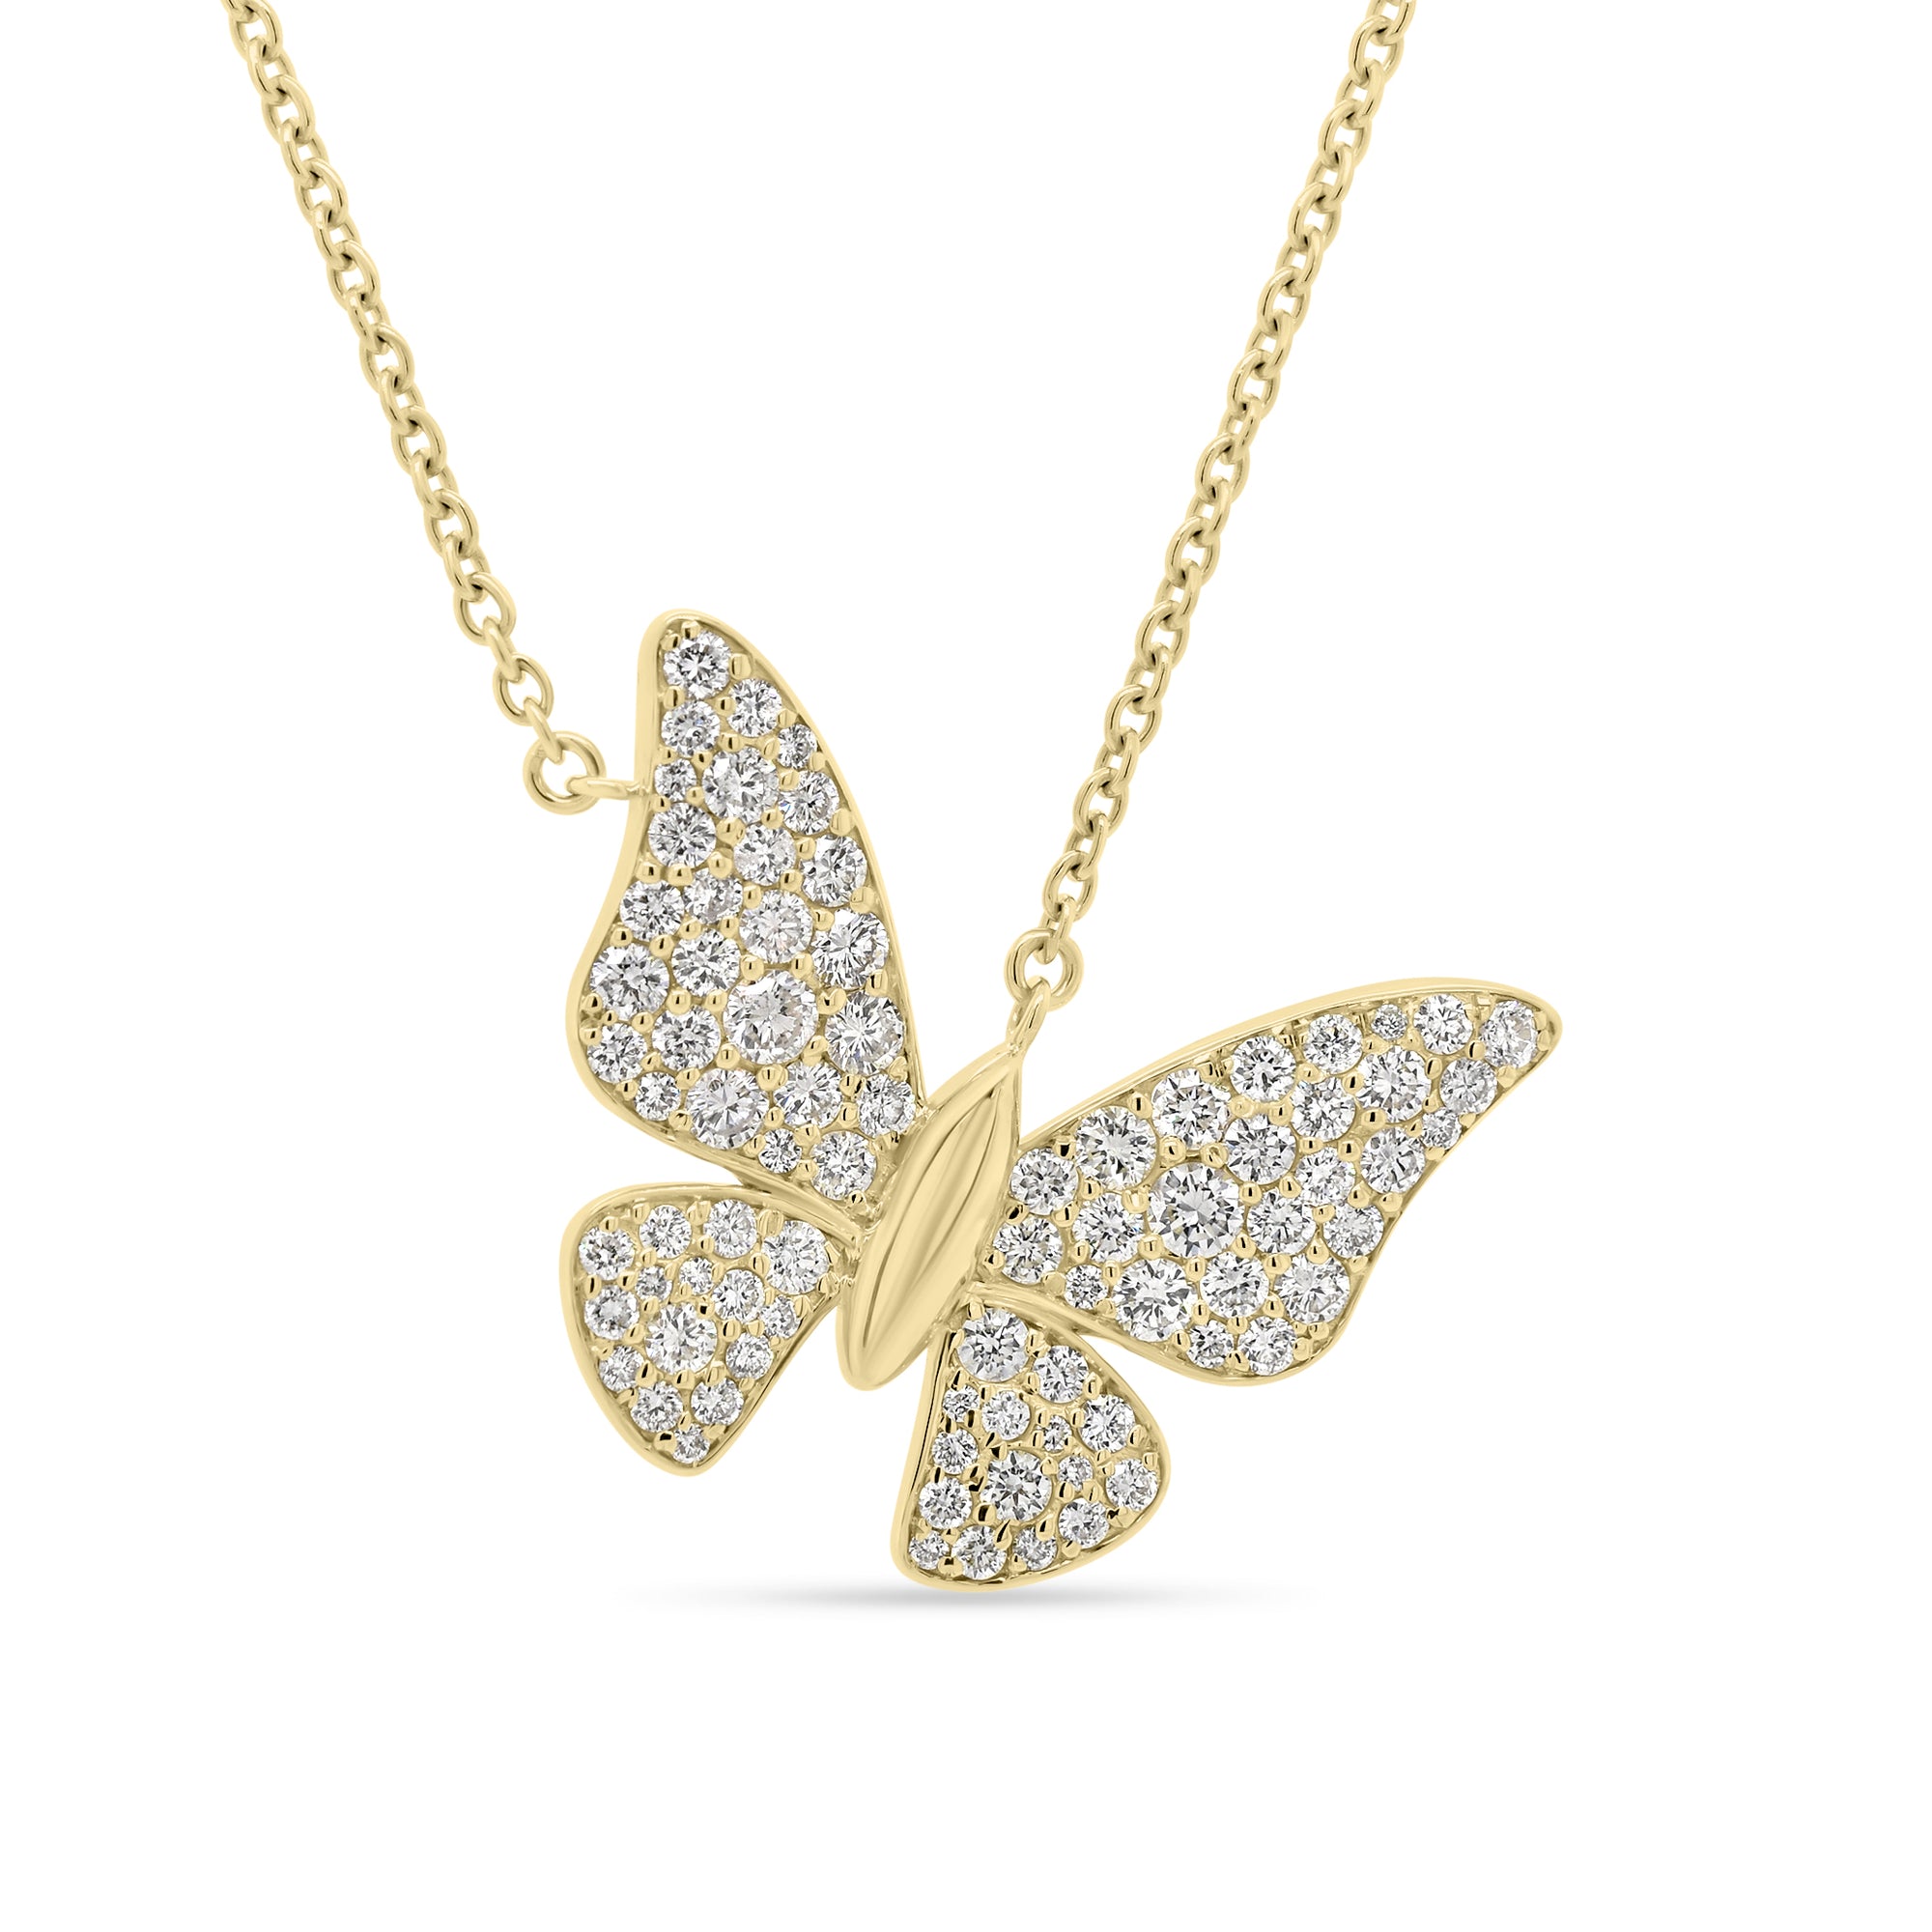 Diamond Fluttery Butterfly Necklace  - 14K gold weighing 7.63 grams  - diamonds totaling 1.45 carats